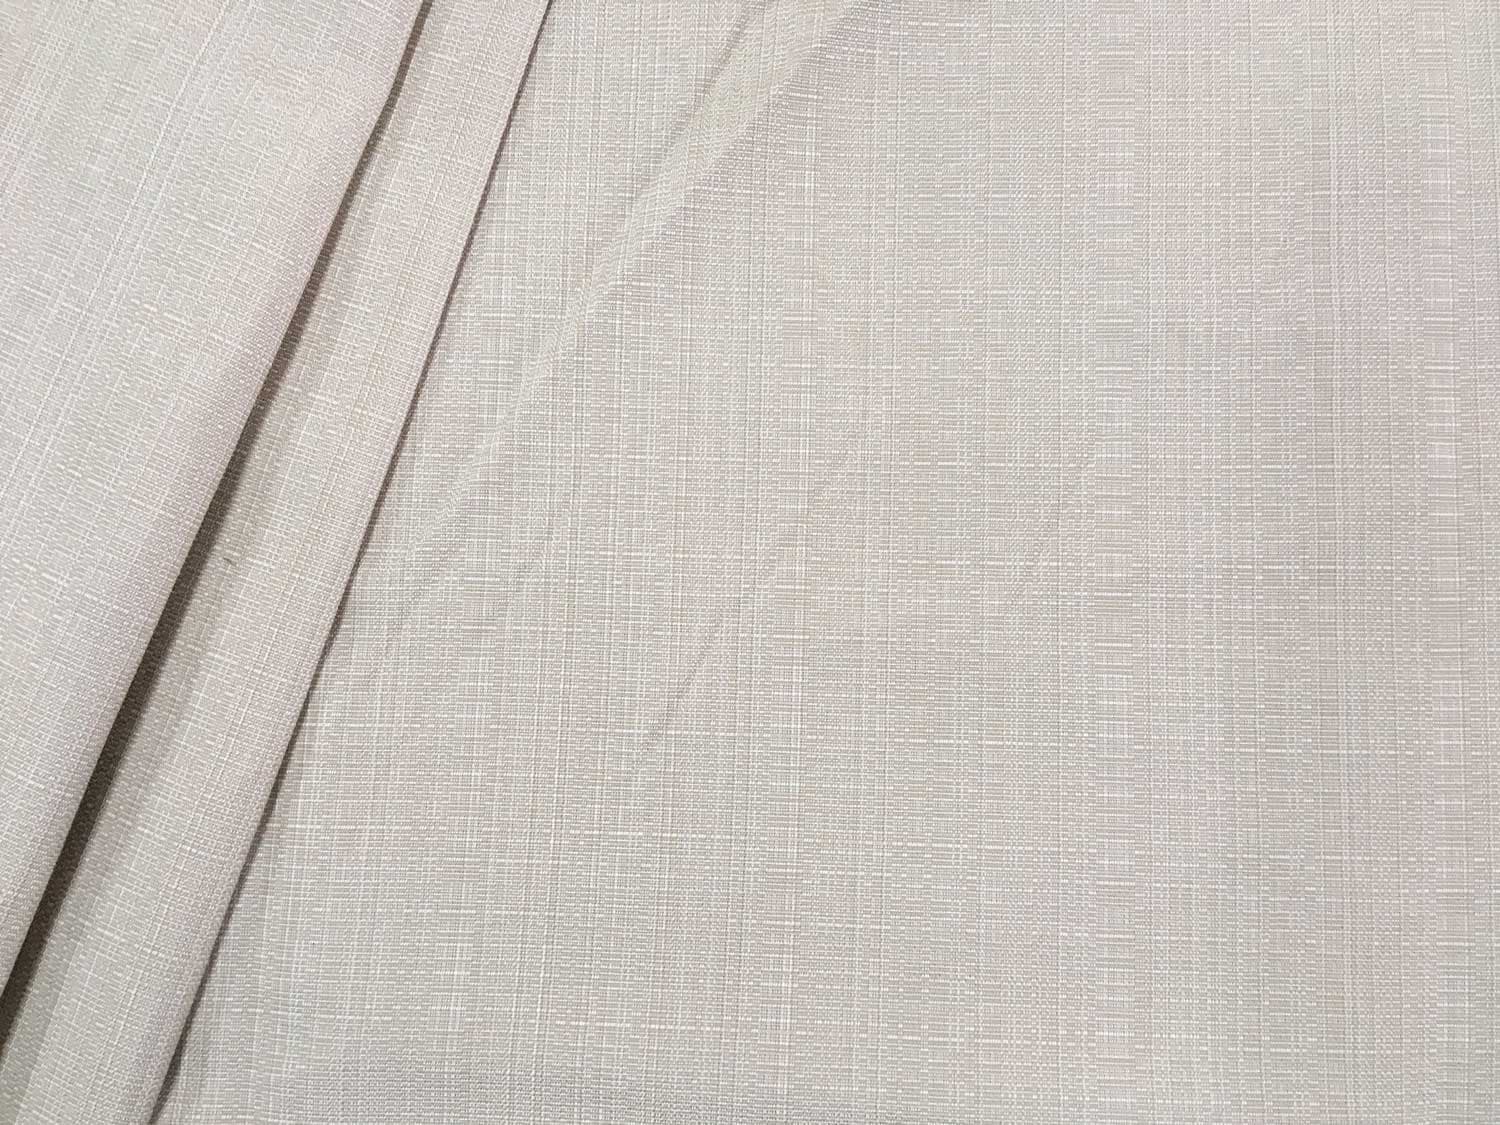 Beige self lined faux linen remnant crafts fabric material piece 120x80cm 